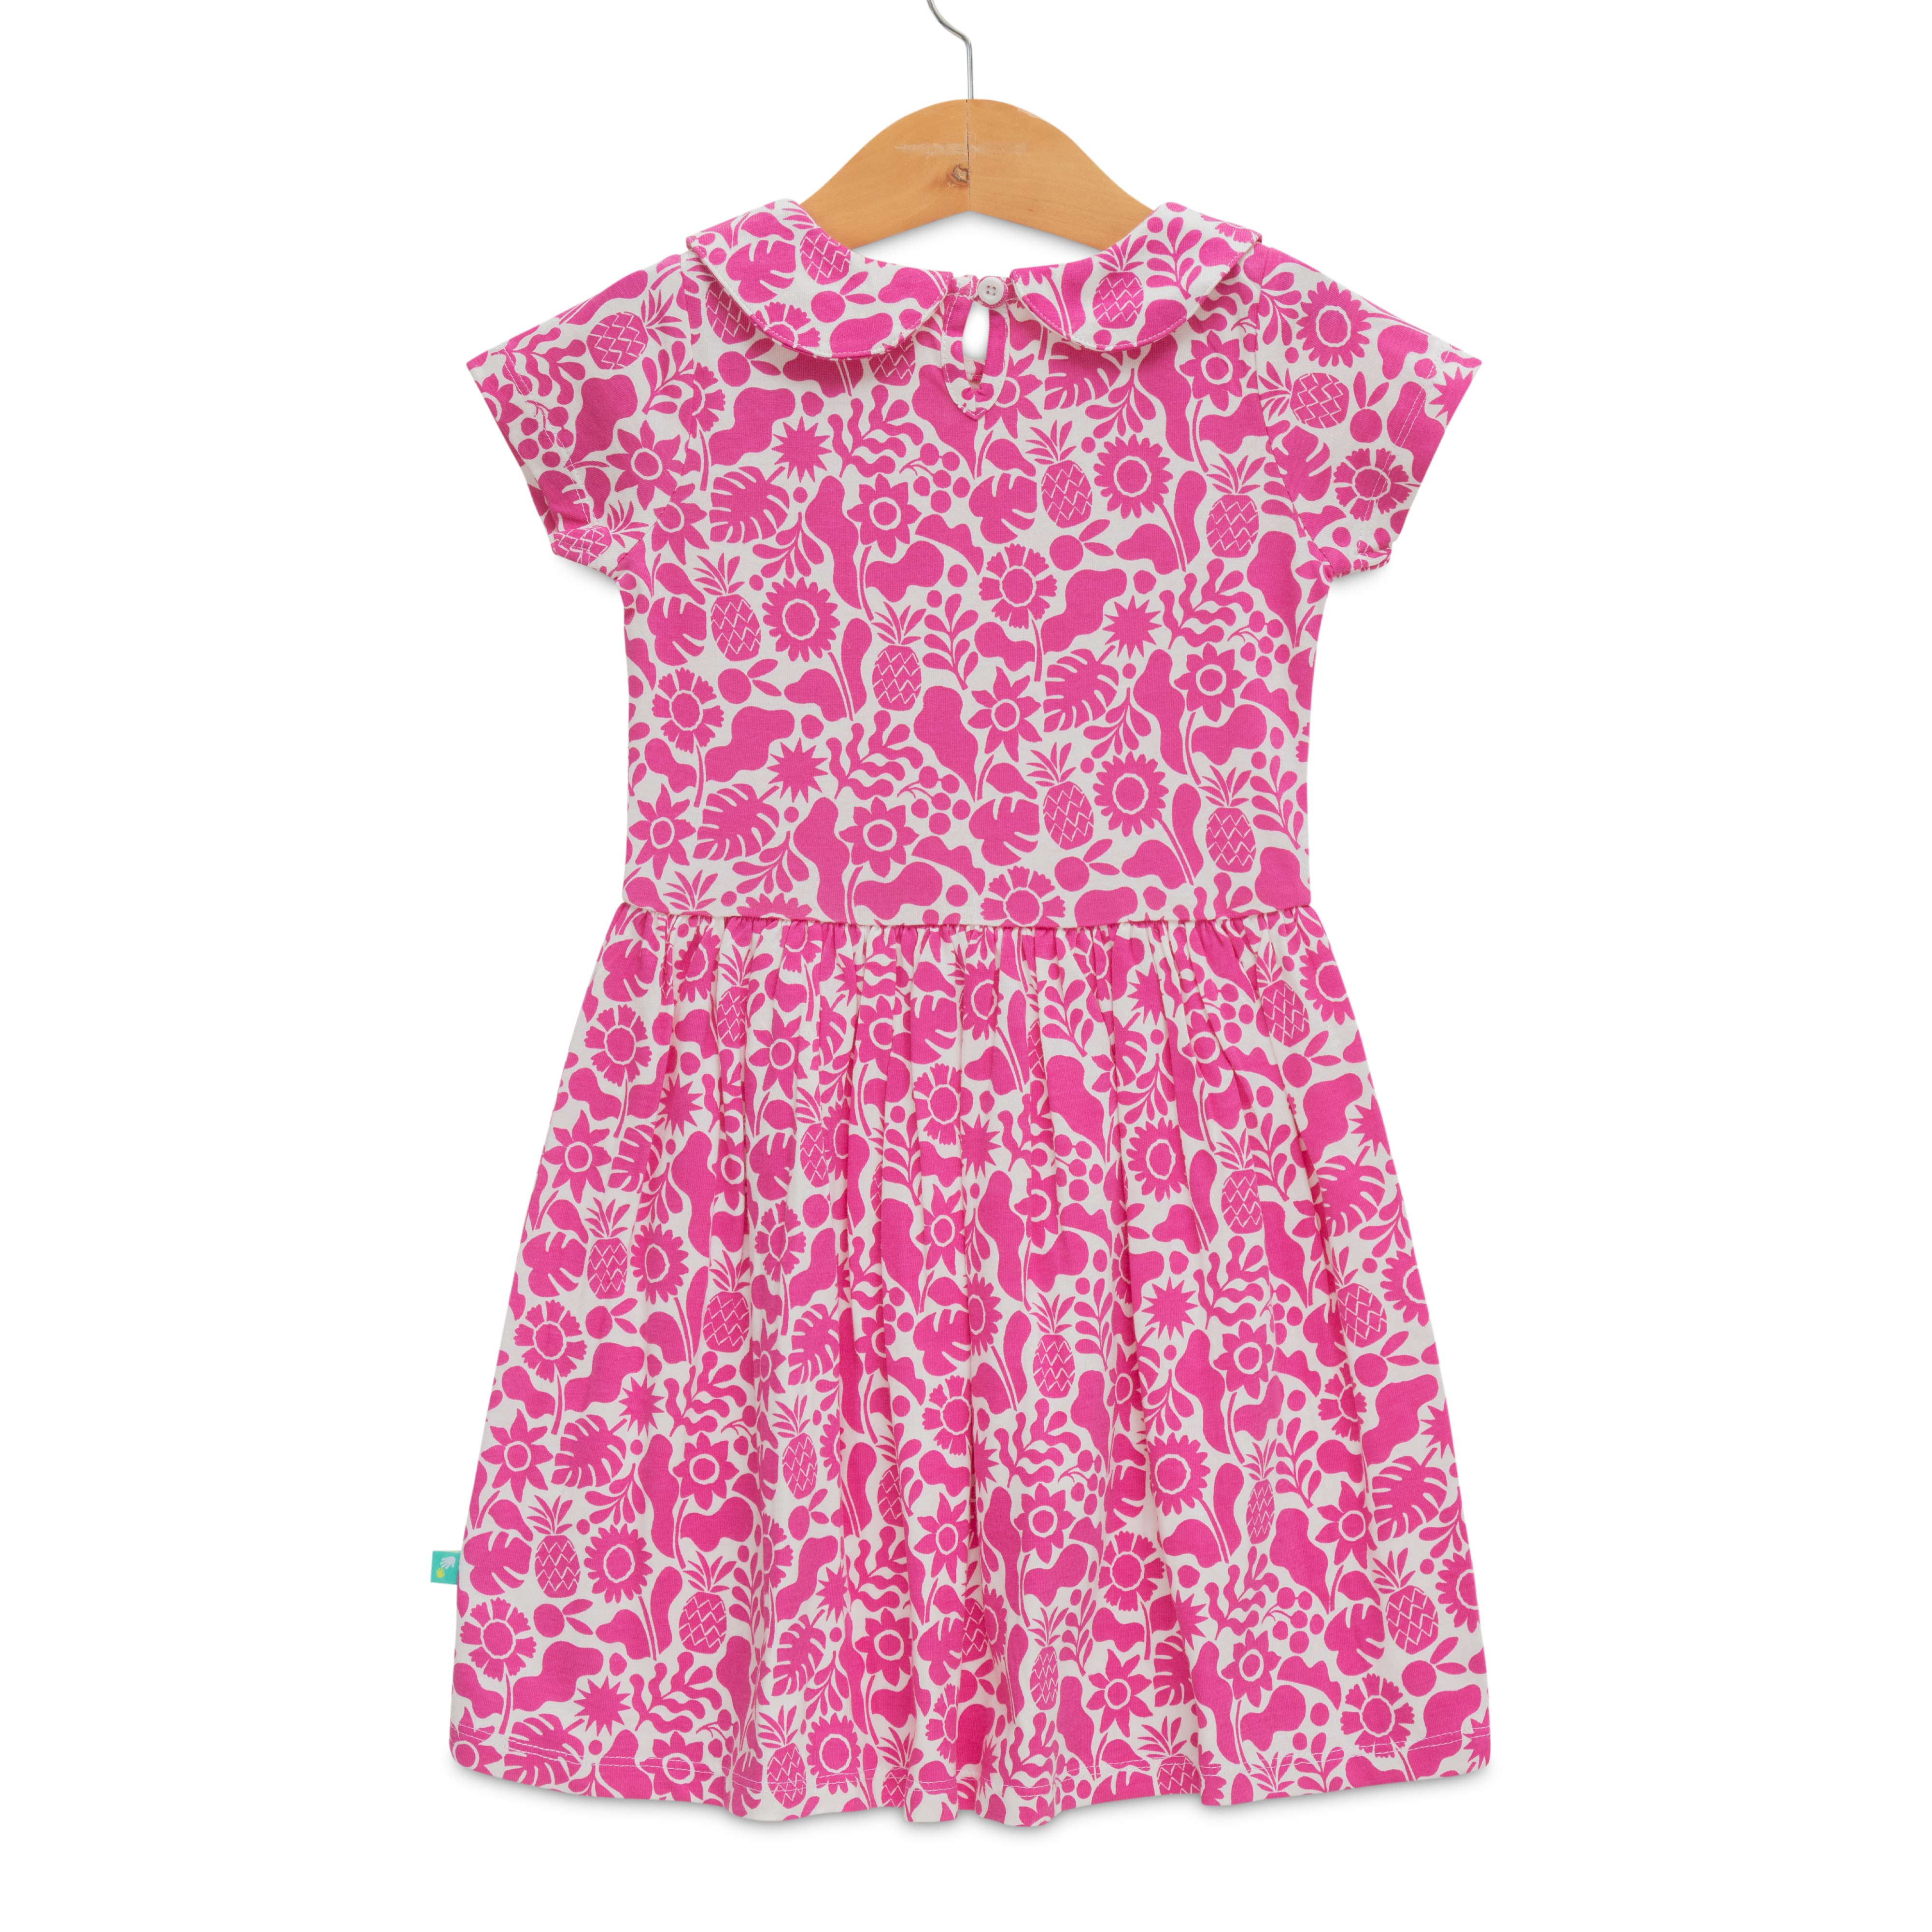 Girls Floral Printed Peter Pan Neck Fit & Flare Dress